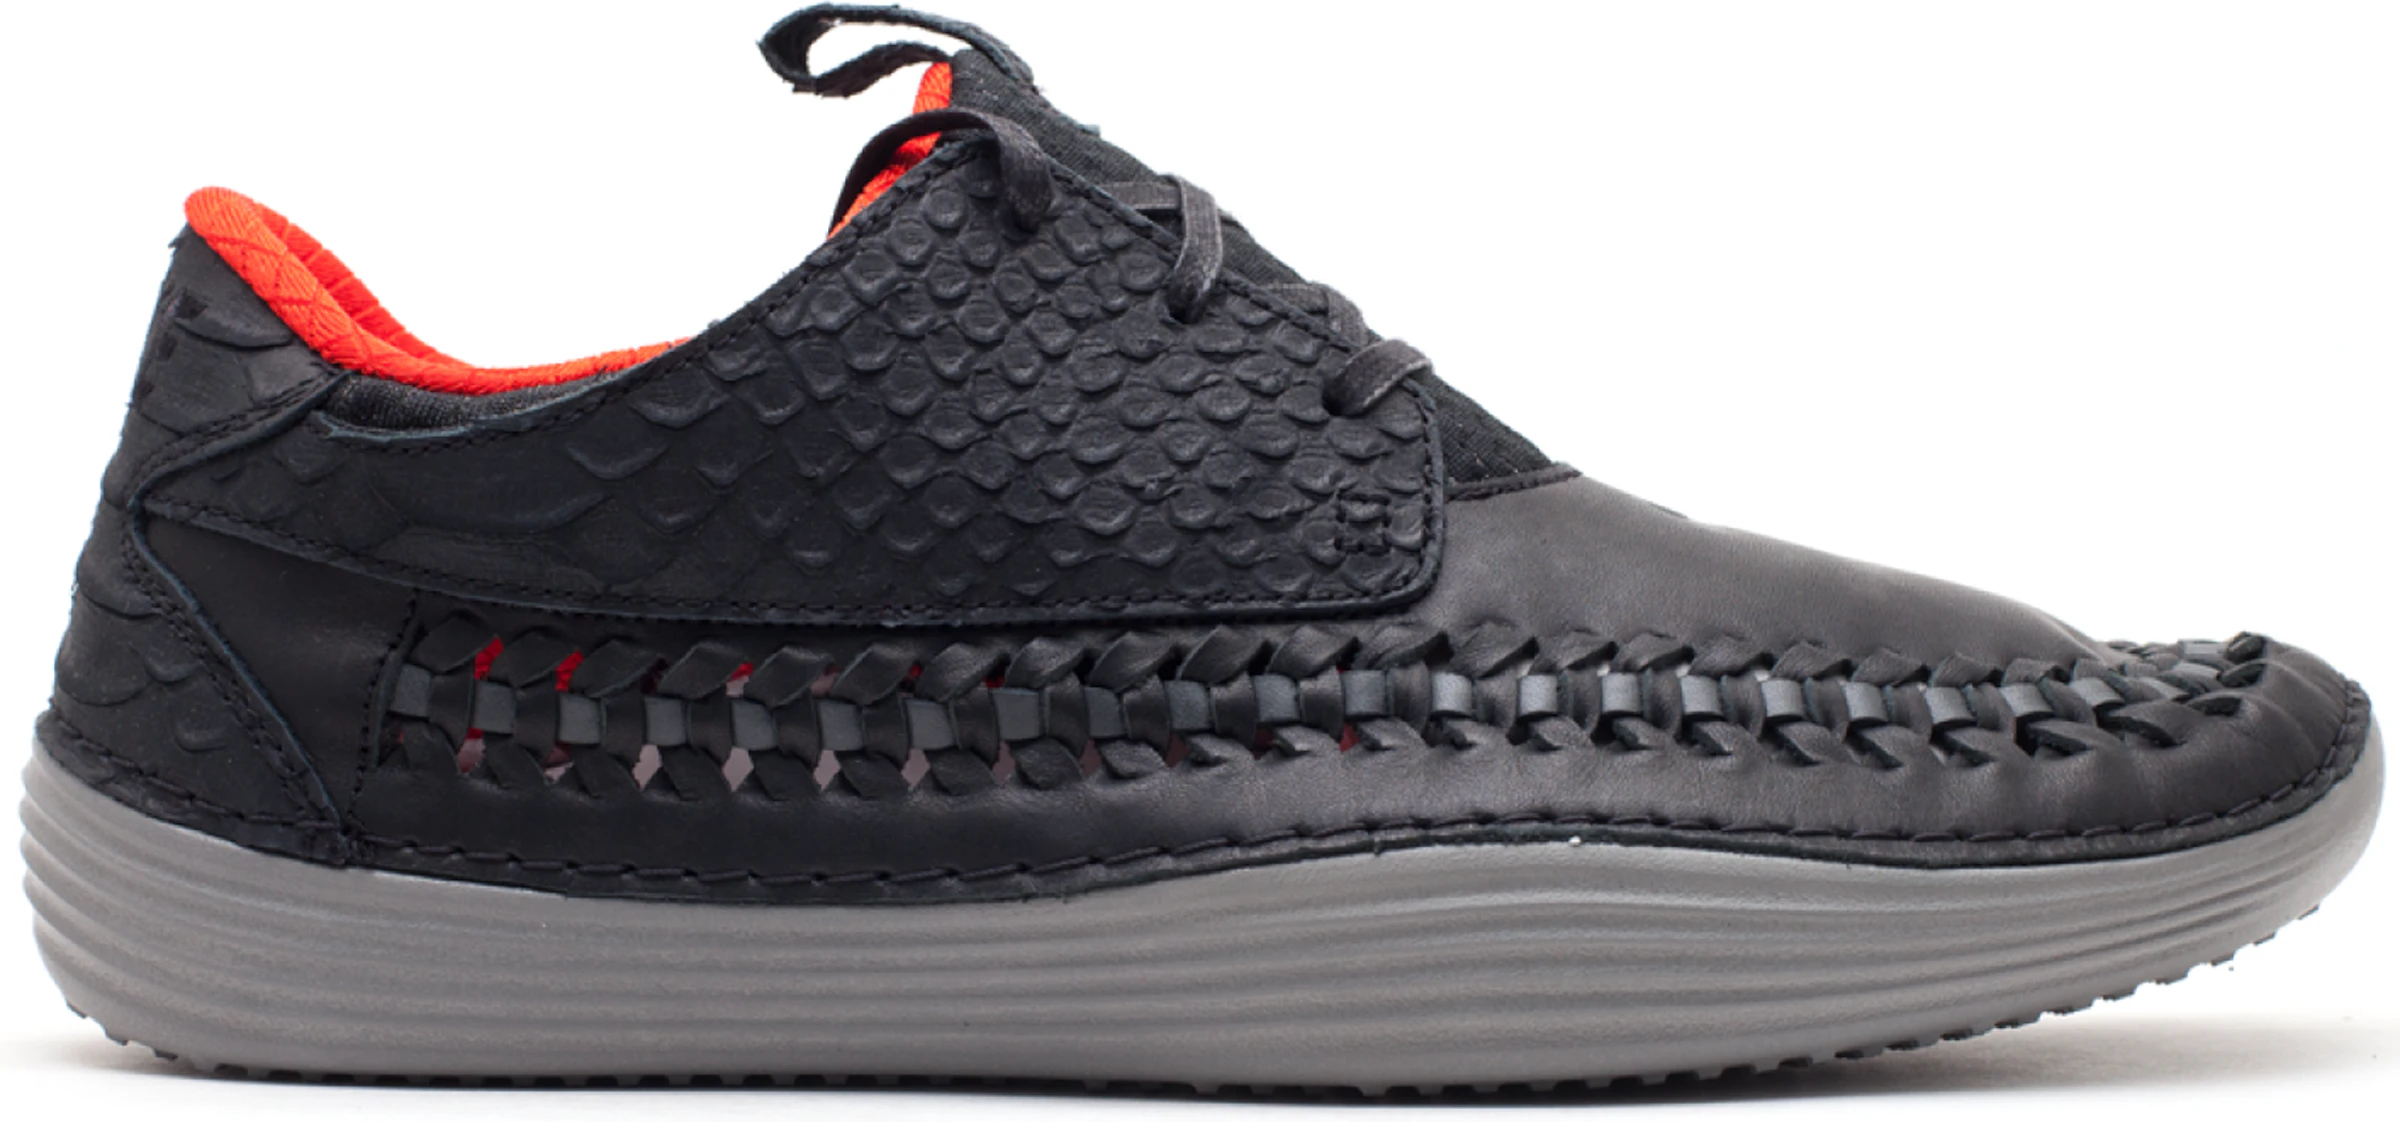 Nike Solarsoft Moccasin Woven 586584-006 - ES